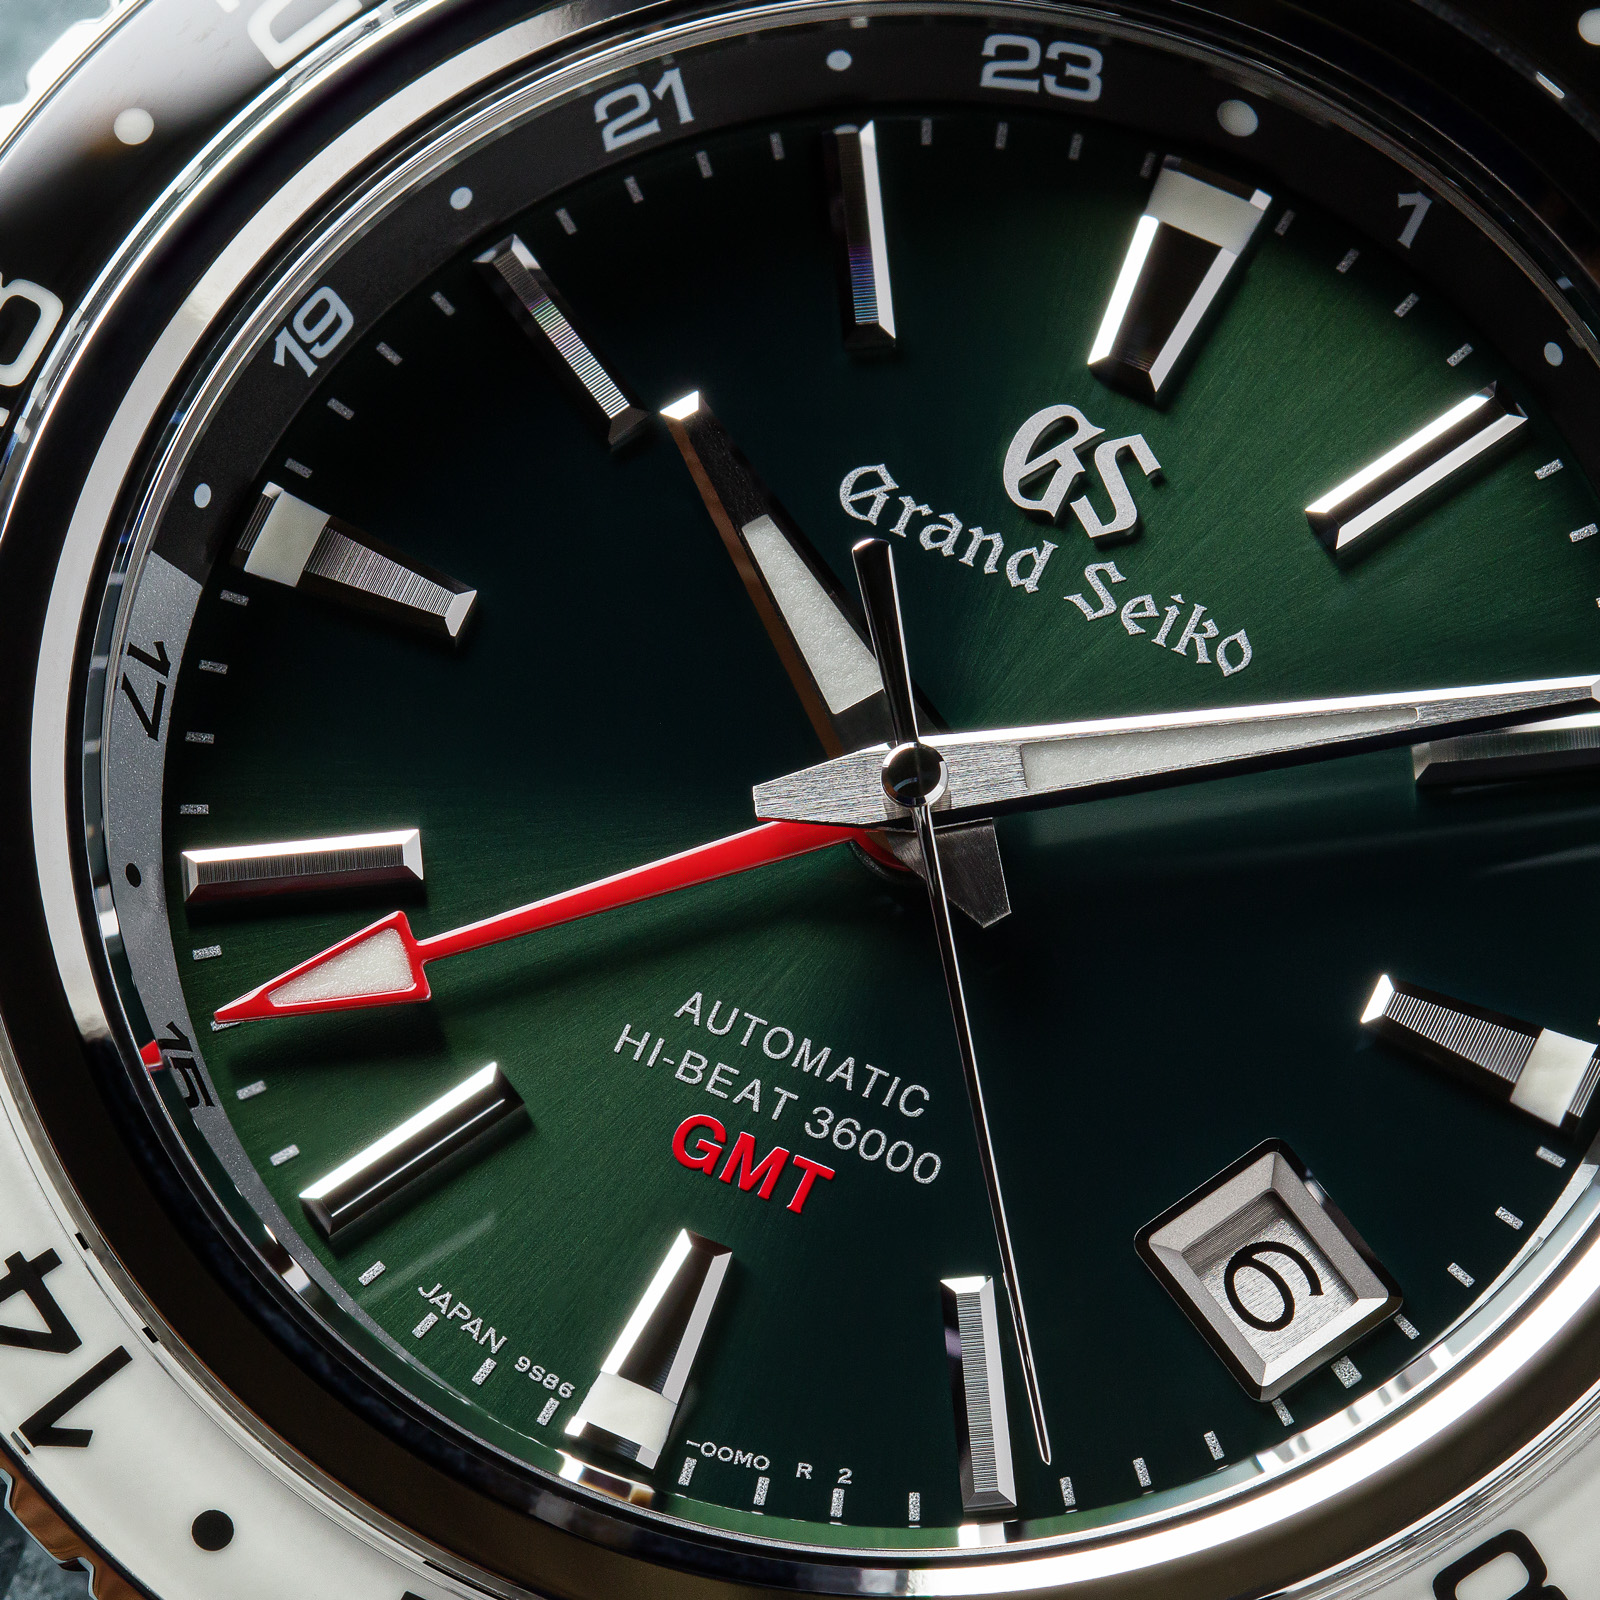 Grand Seiko SBGJ239 - macro detail of green dial with red accents. 